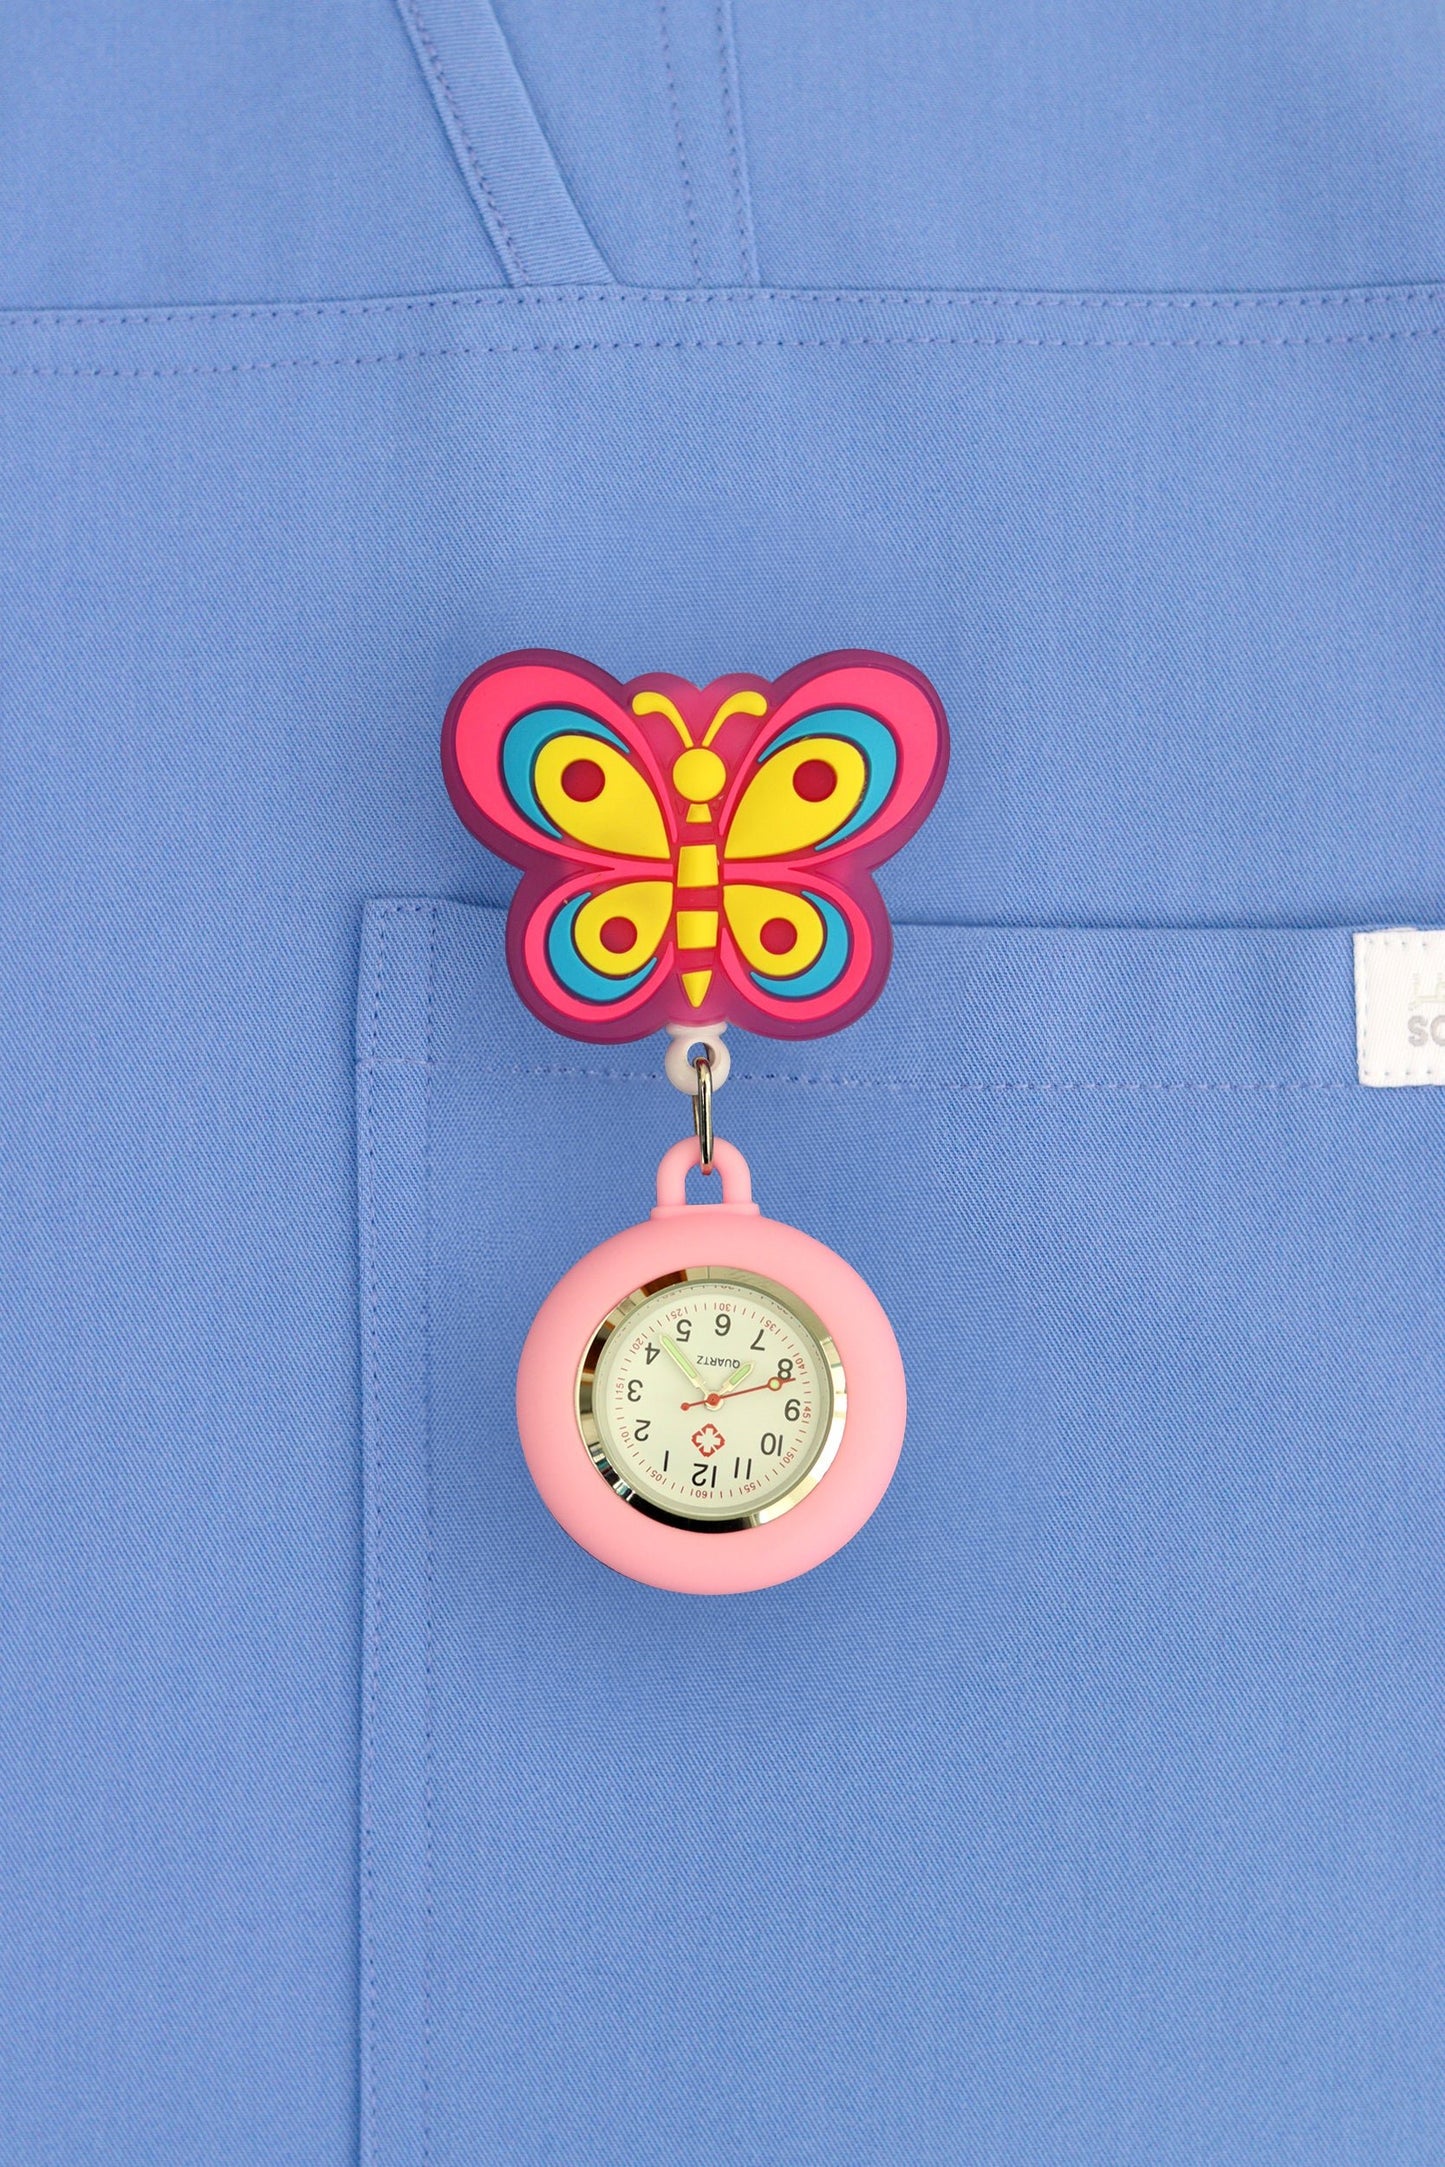 Nurse Pocket Silicon Fob Clip Watch - Butterfly